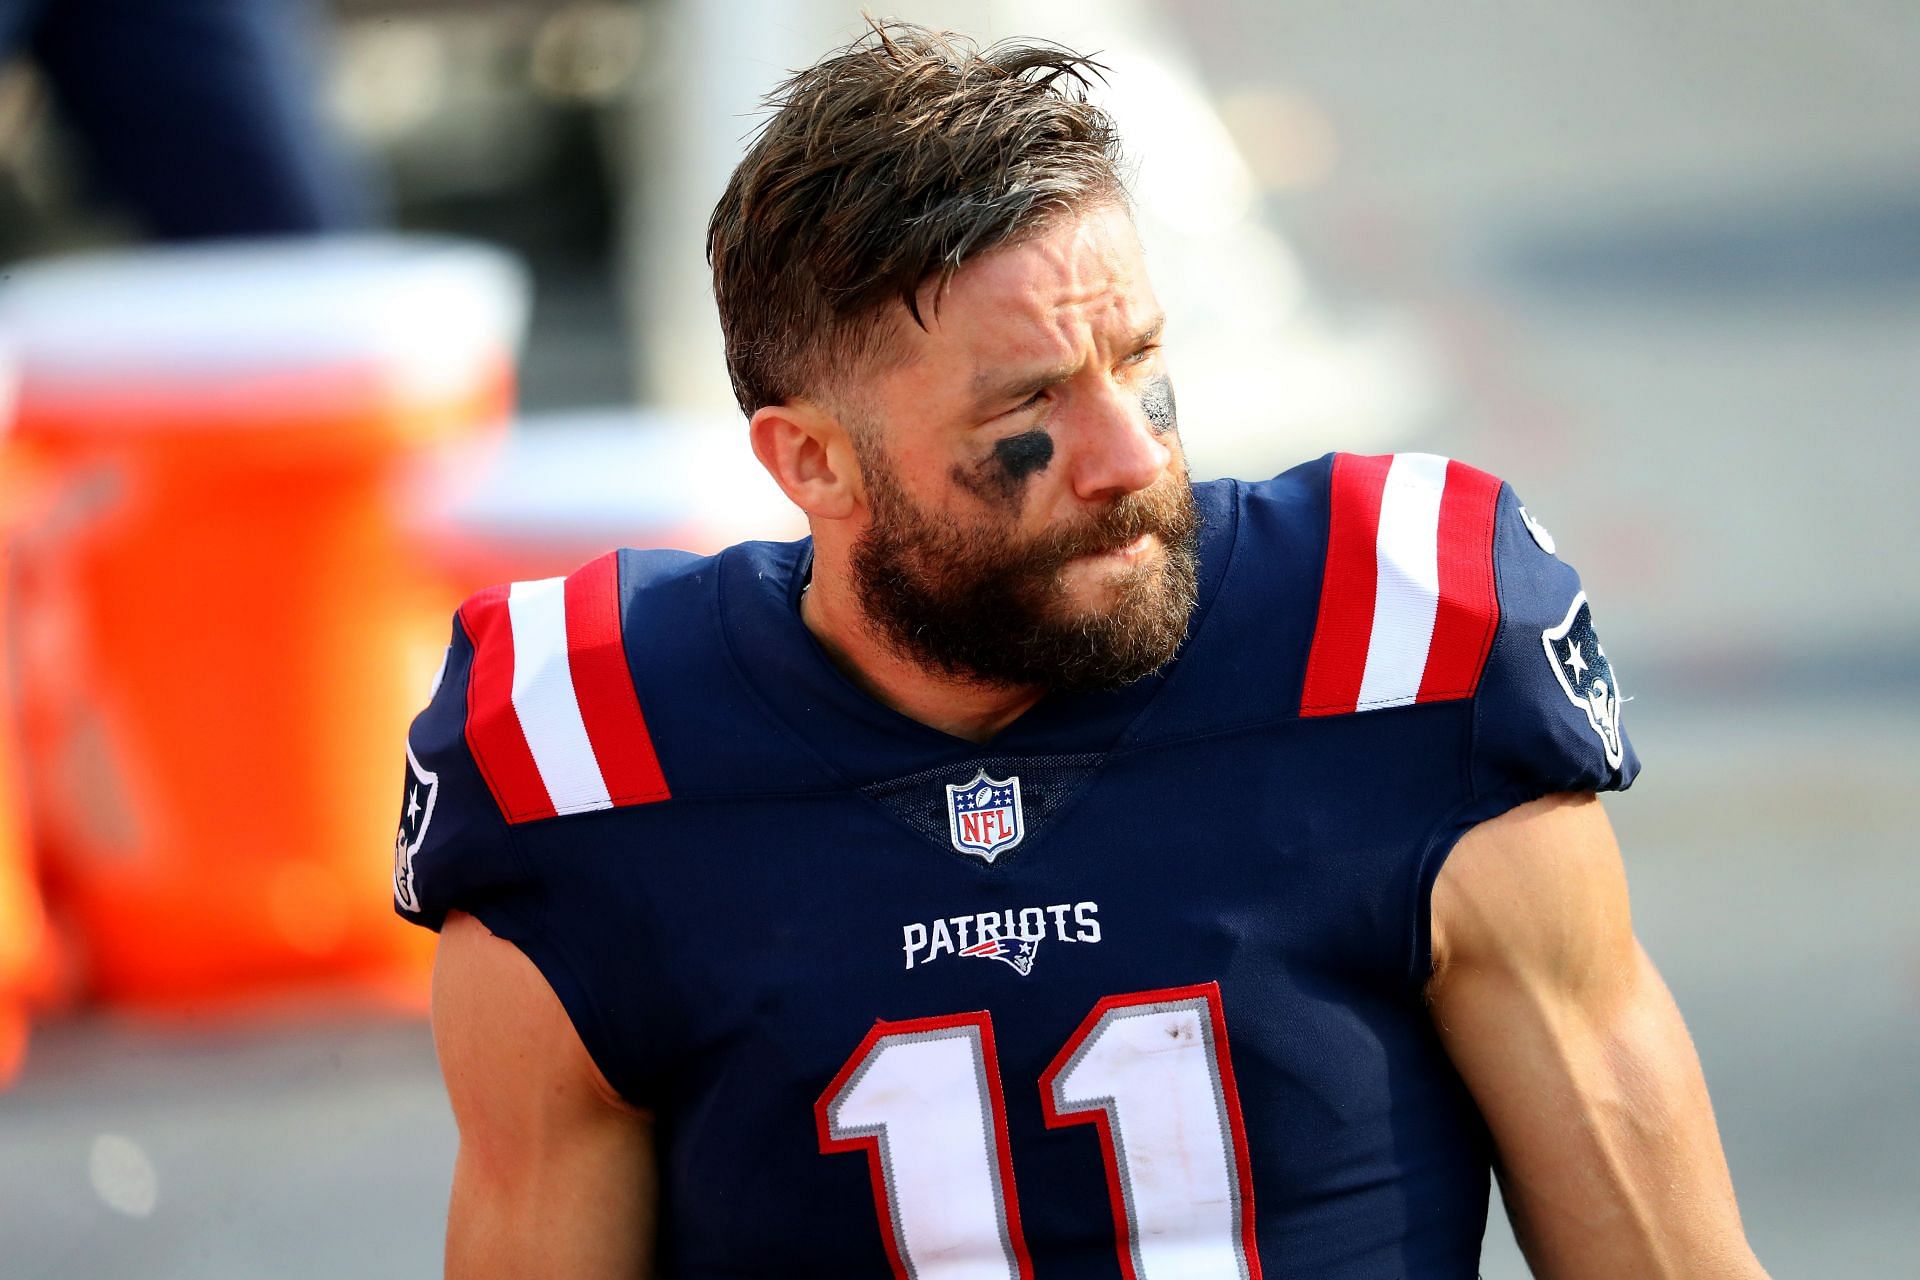 Former New England Patriots wide receiver Julian Edelman on the sidelines